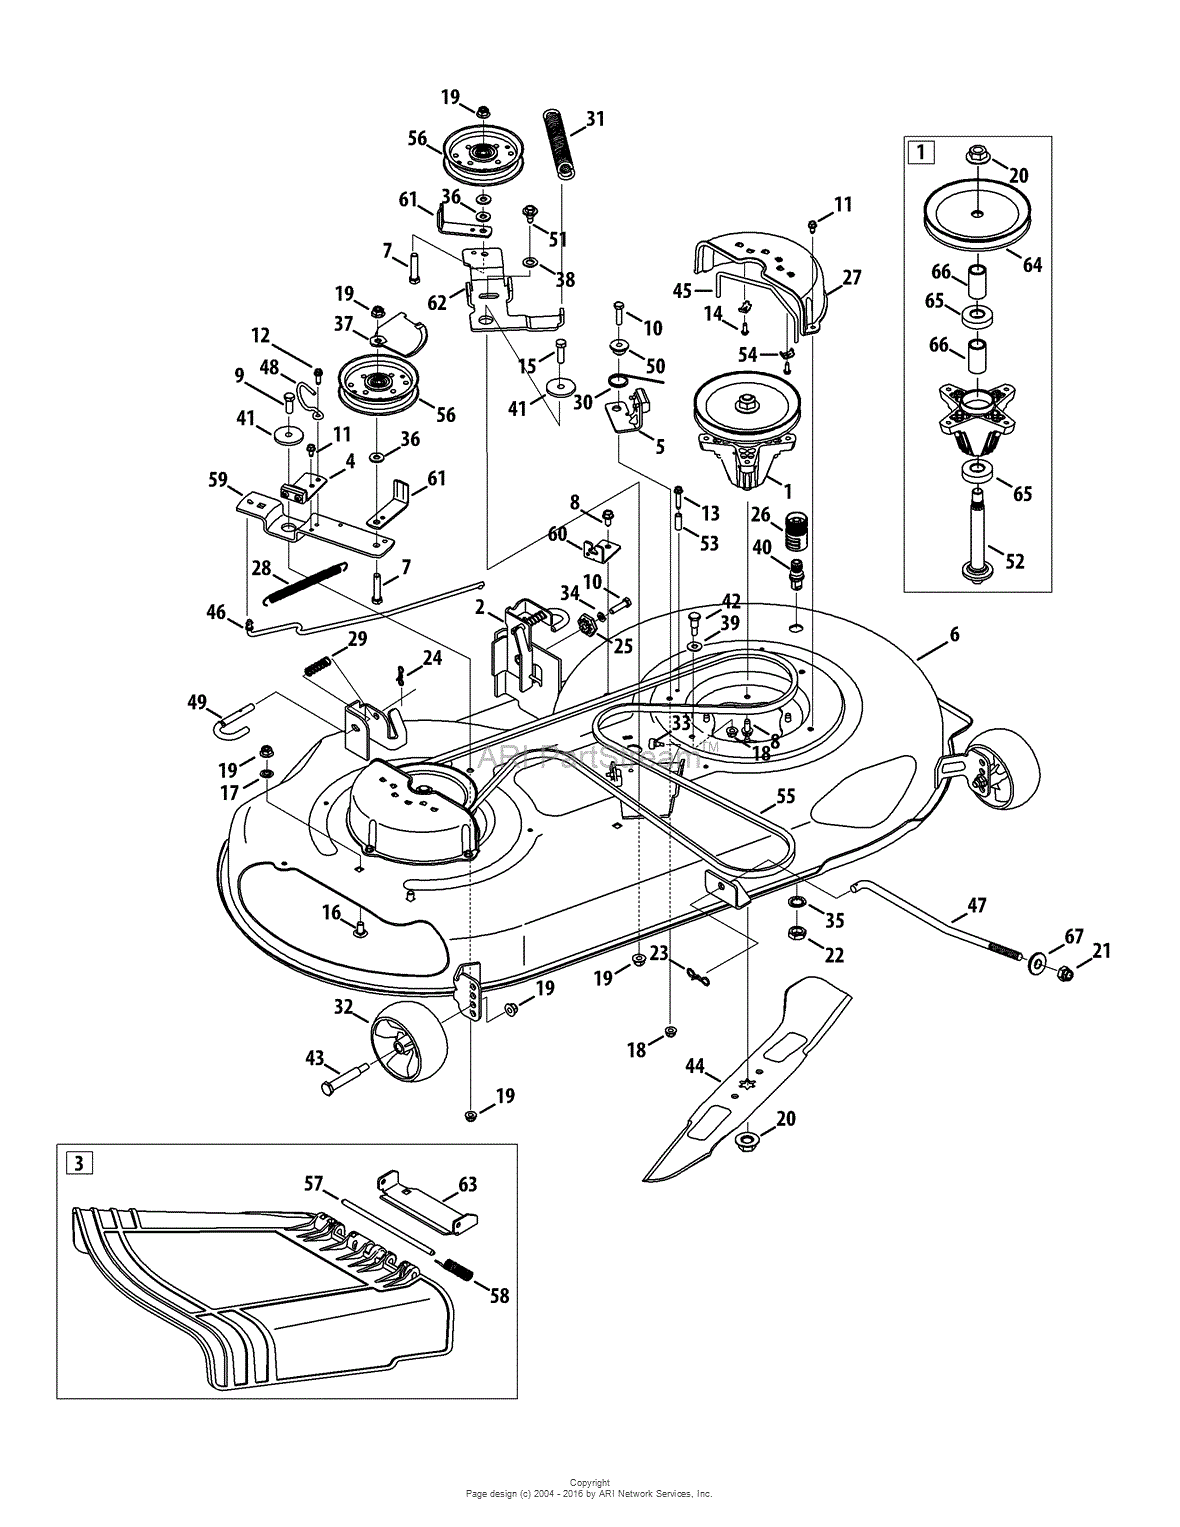 wiring diagram for 917.288612 sears mower